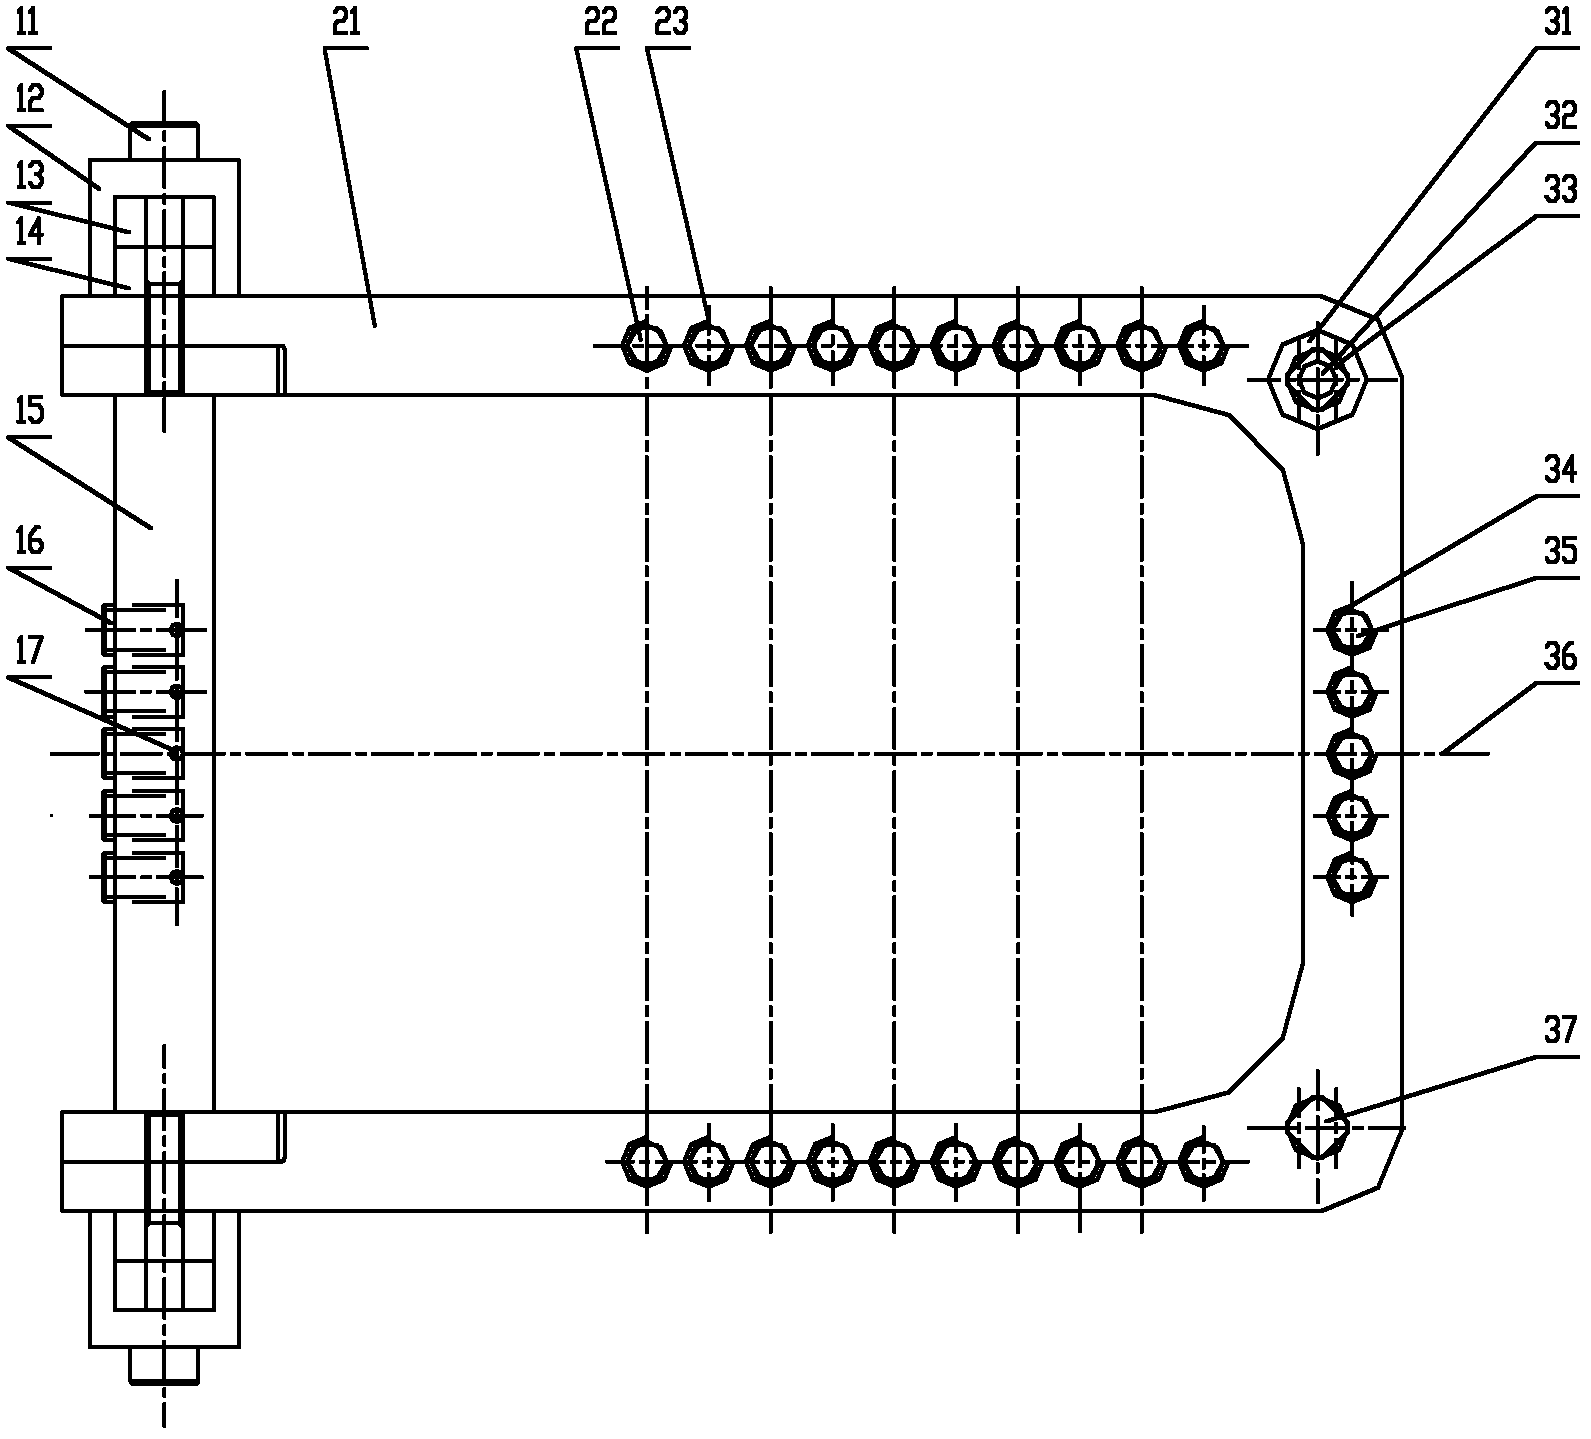 Dactylion separating and spreading device